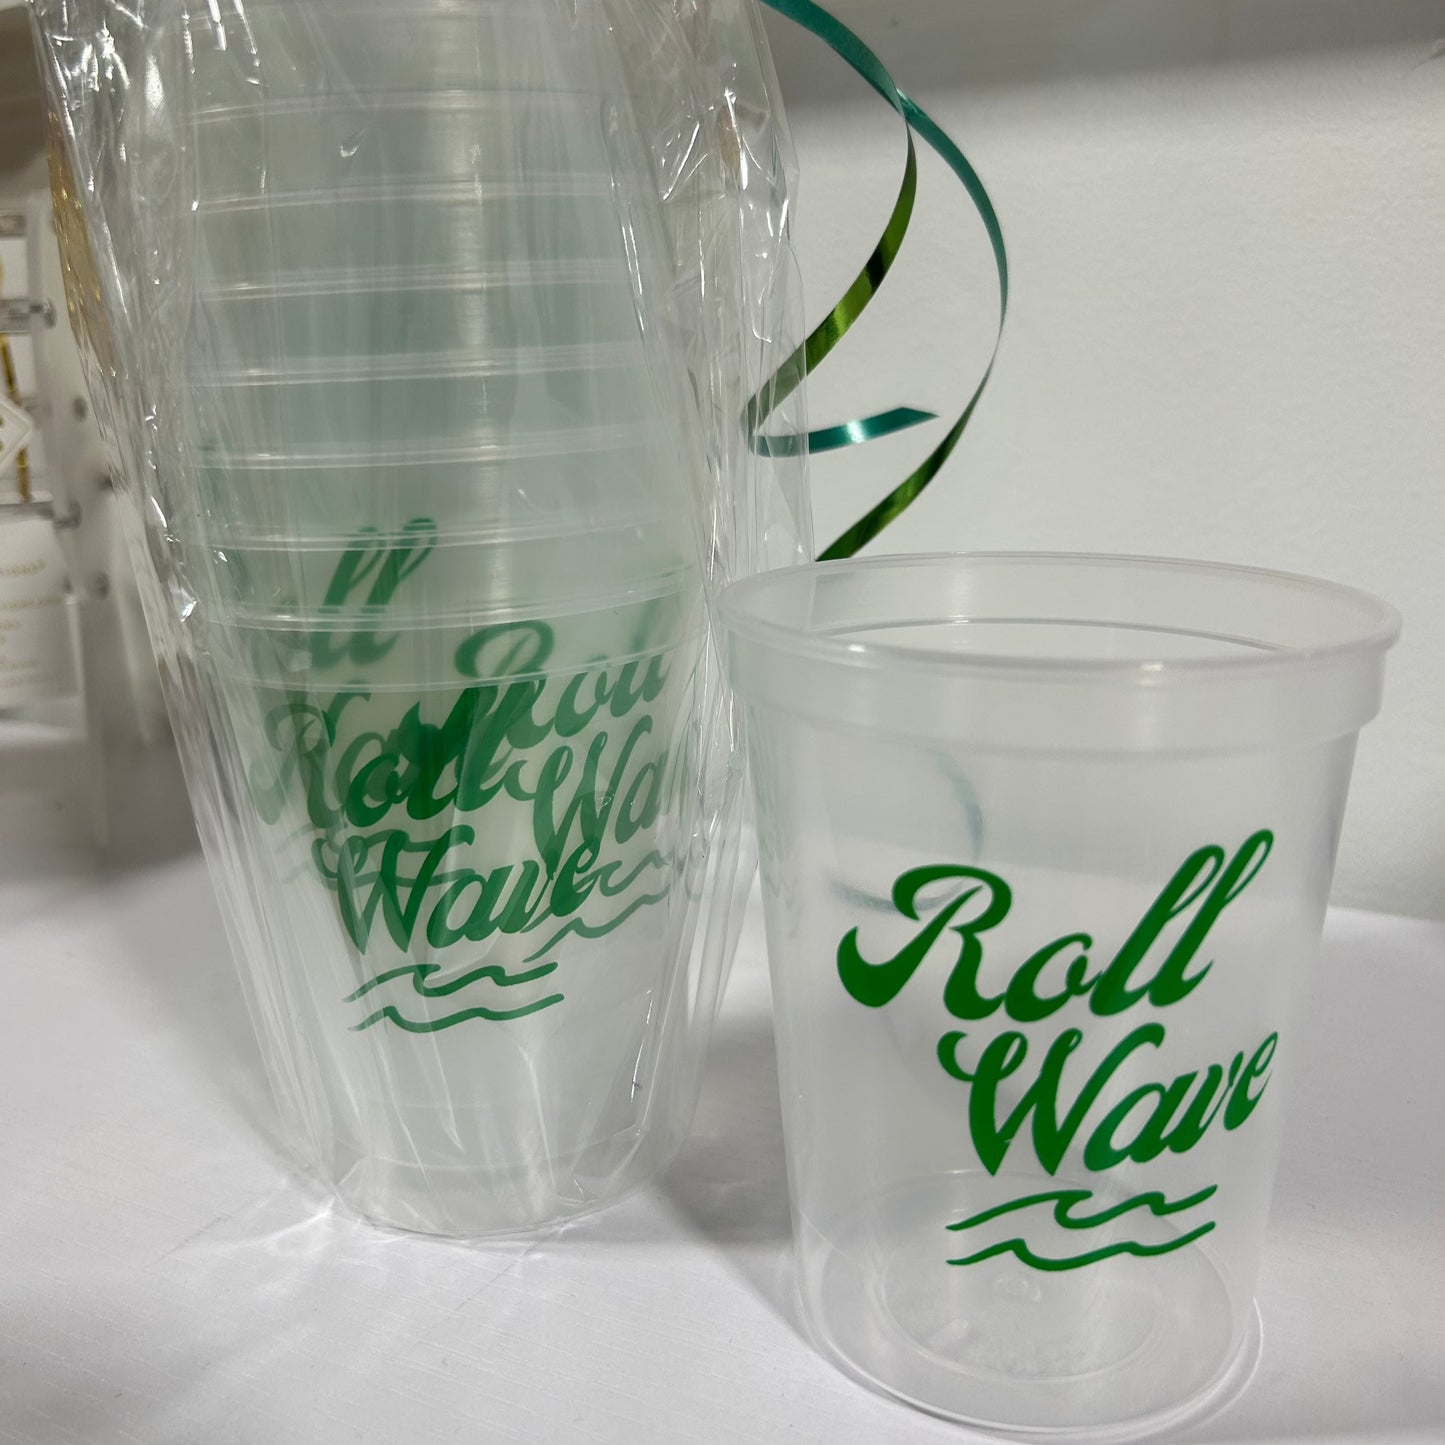 Roll Wave Tulane Cups